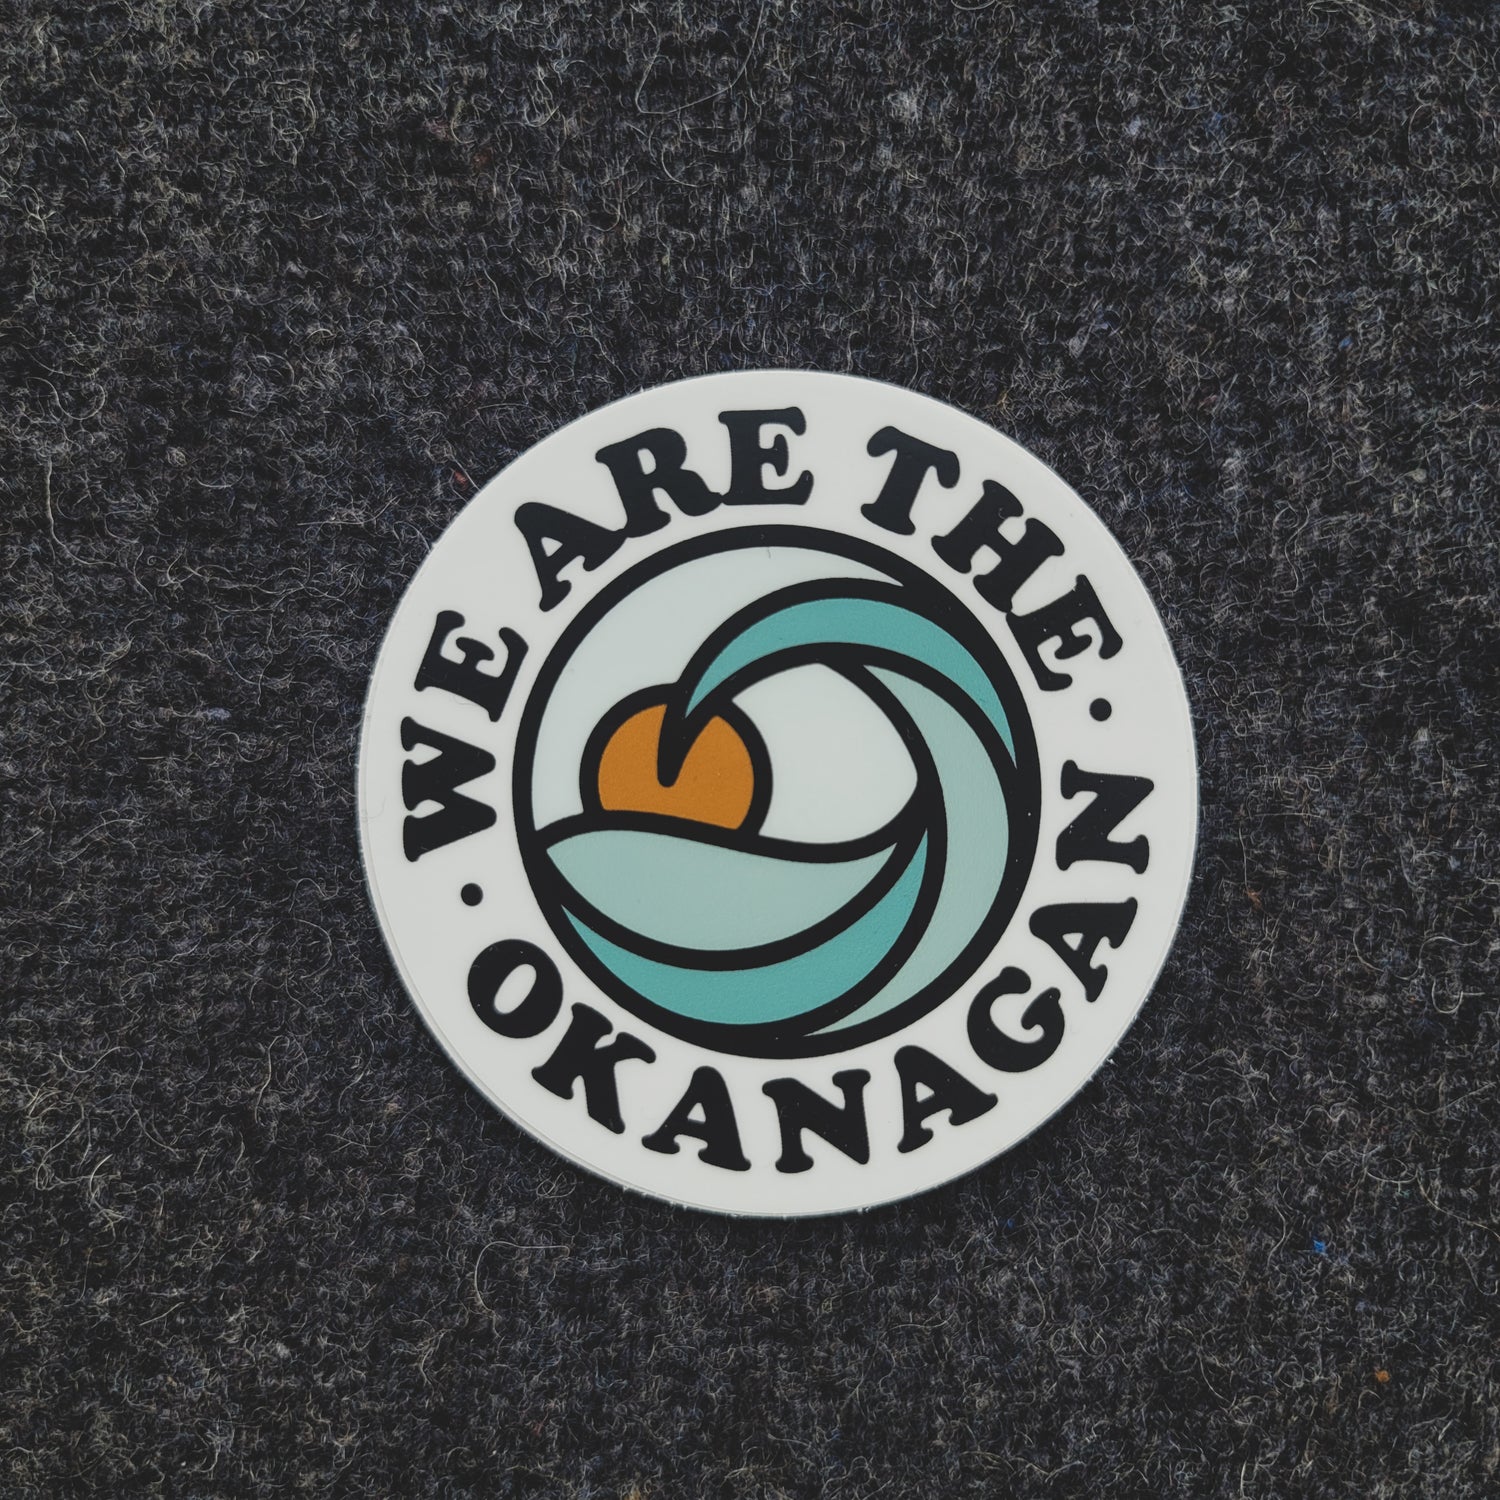 decal - decals - Stickers We are the Okanagan Sticker 